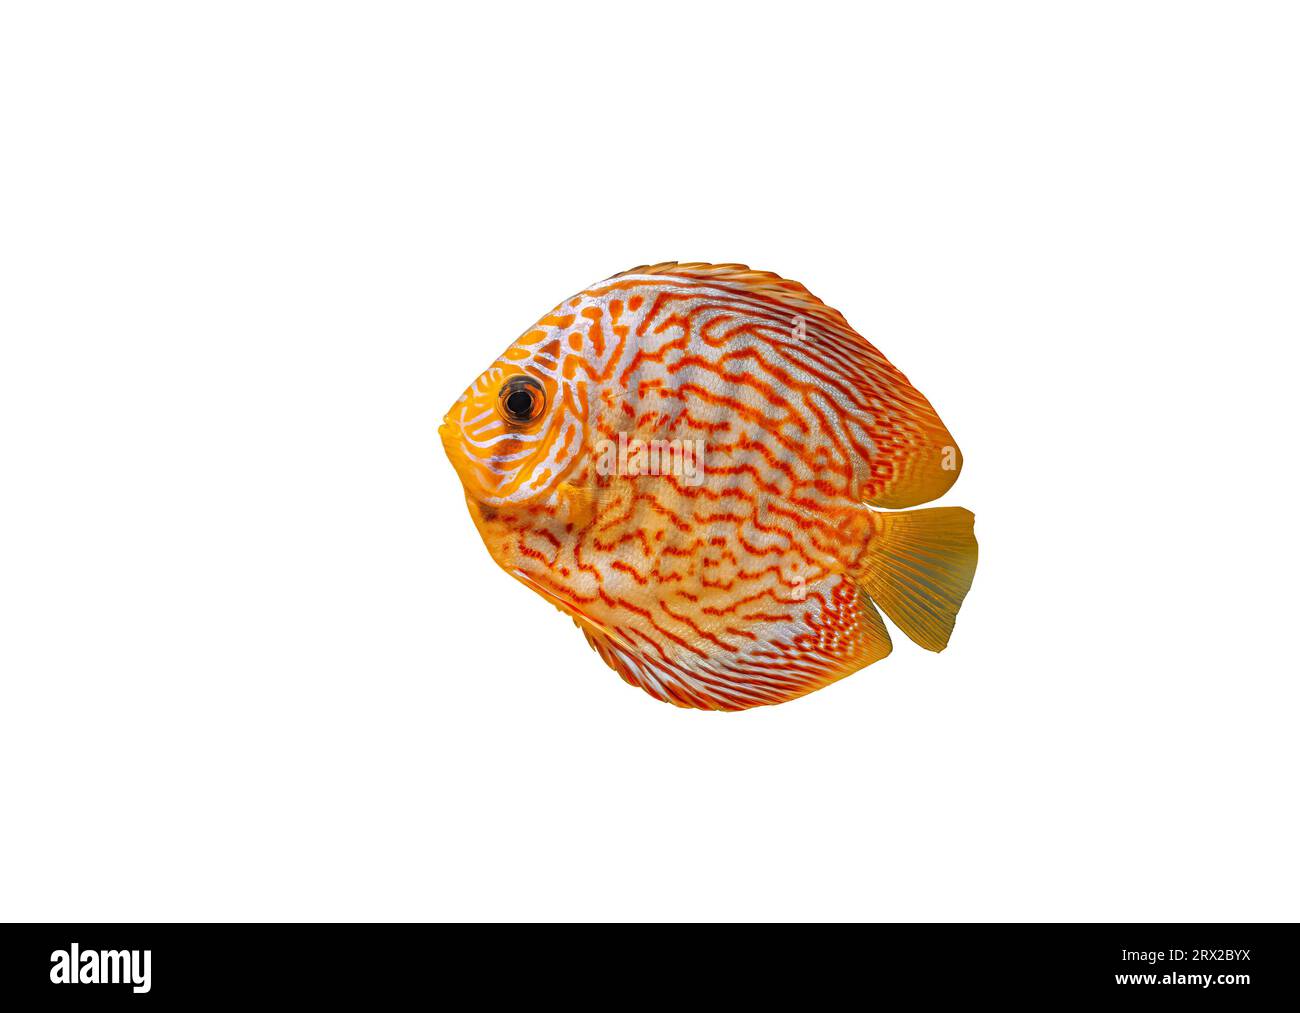 Pompadour small fish isolated on white background. Red Symphysodon discus striped fish cut out icon, side view. Cute aquarium freshwater orange fish c Stock Photo